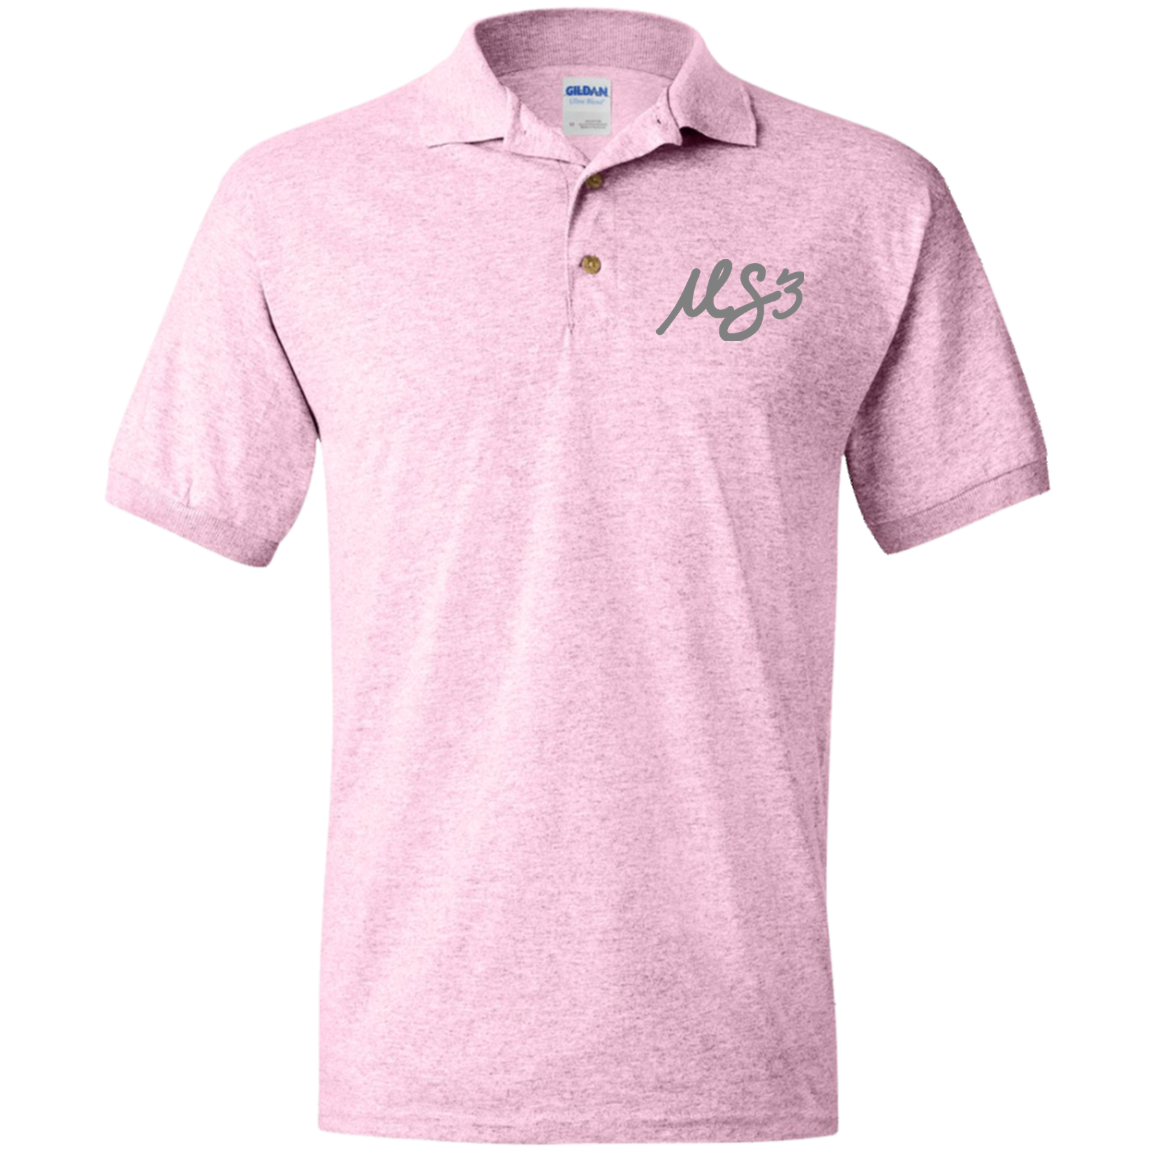 Grey MS3 Jersey Polo